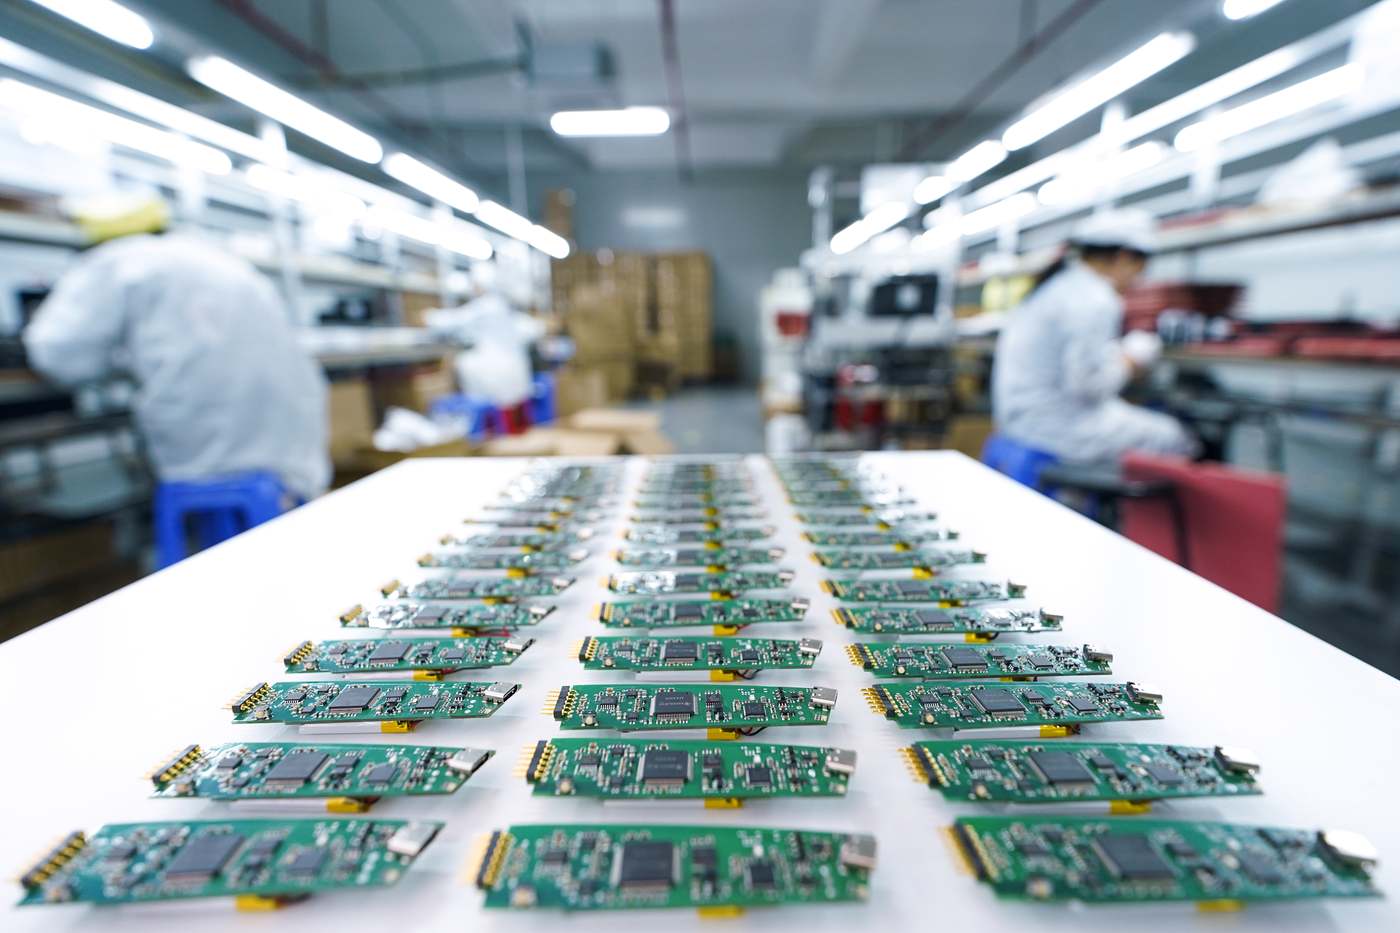 PCB Assemblies lined up